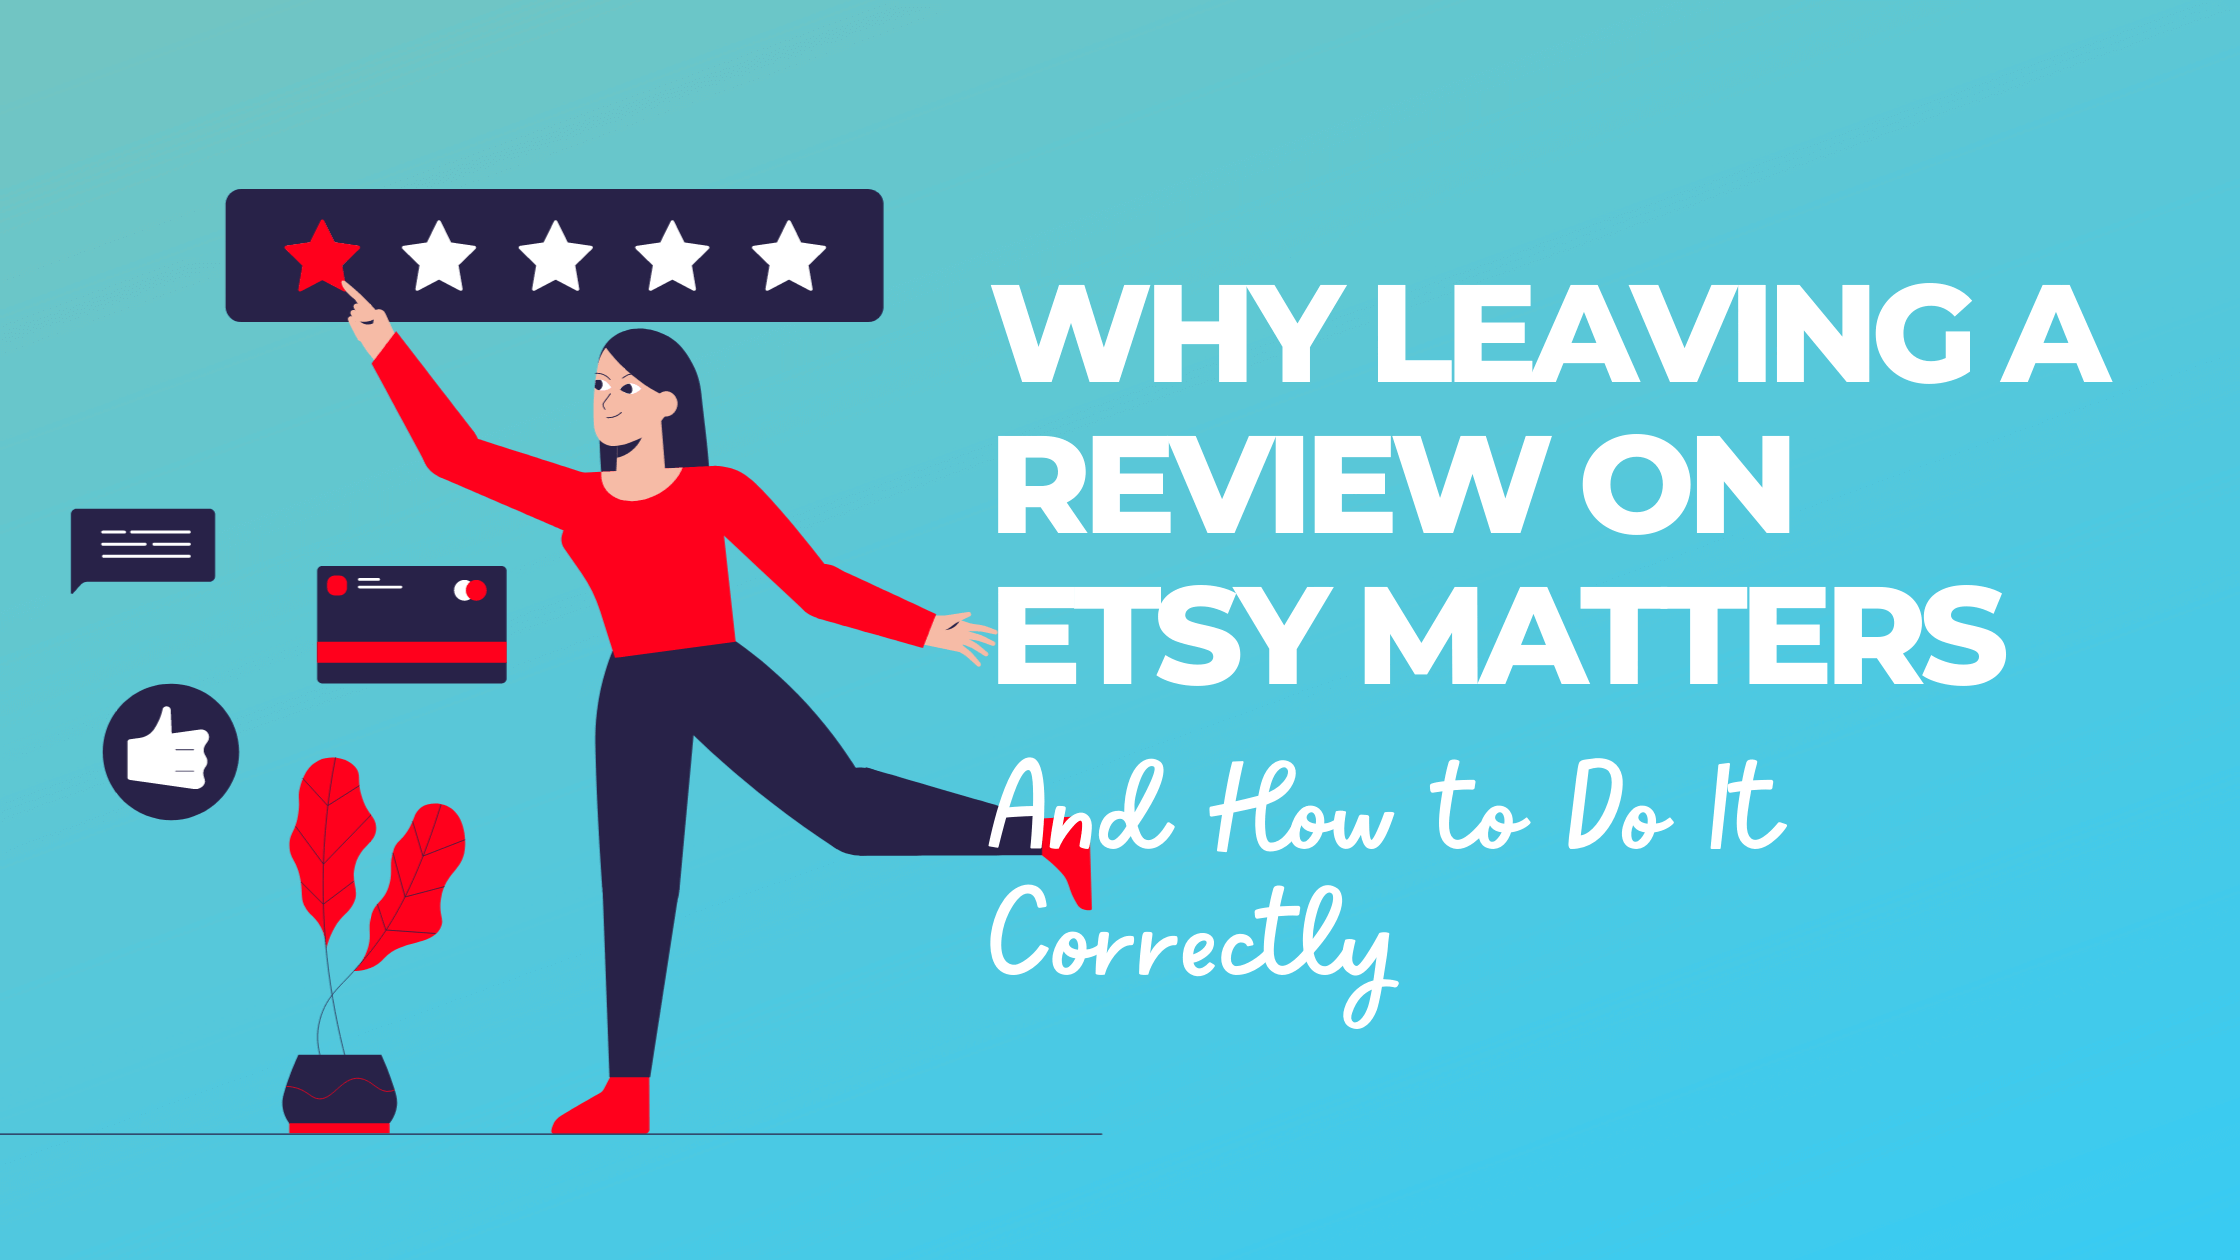 How to Leave a Review on Etsy